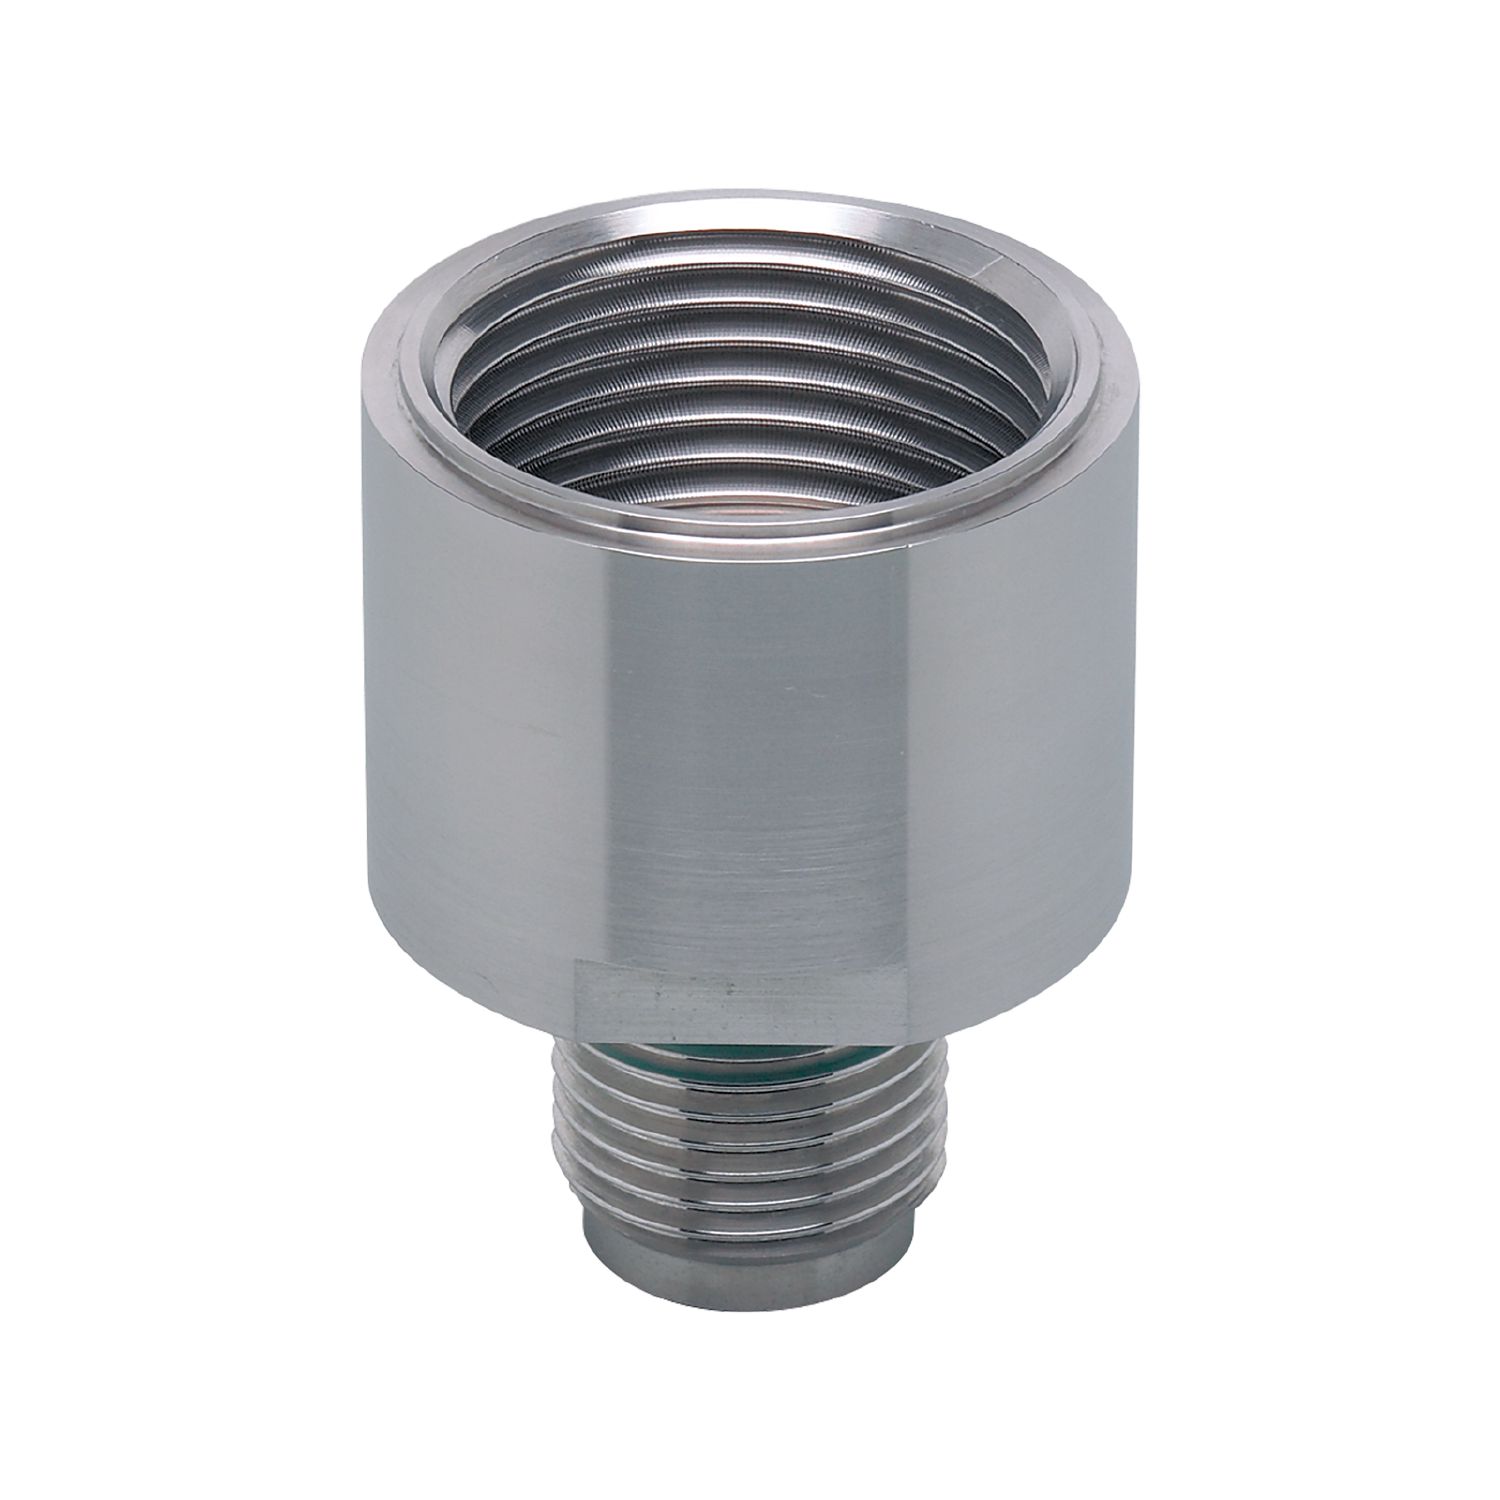 E30116 - Screw-in adapter for process sensors - ifm